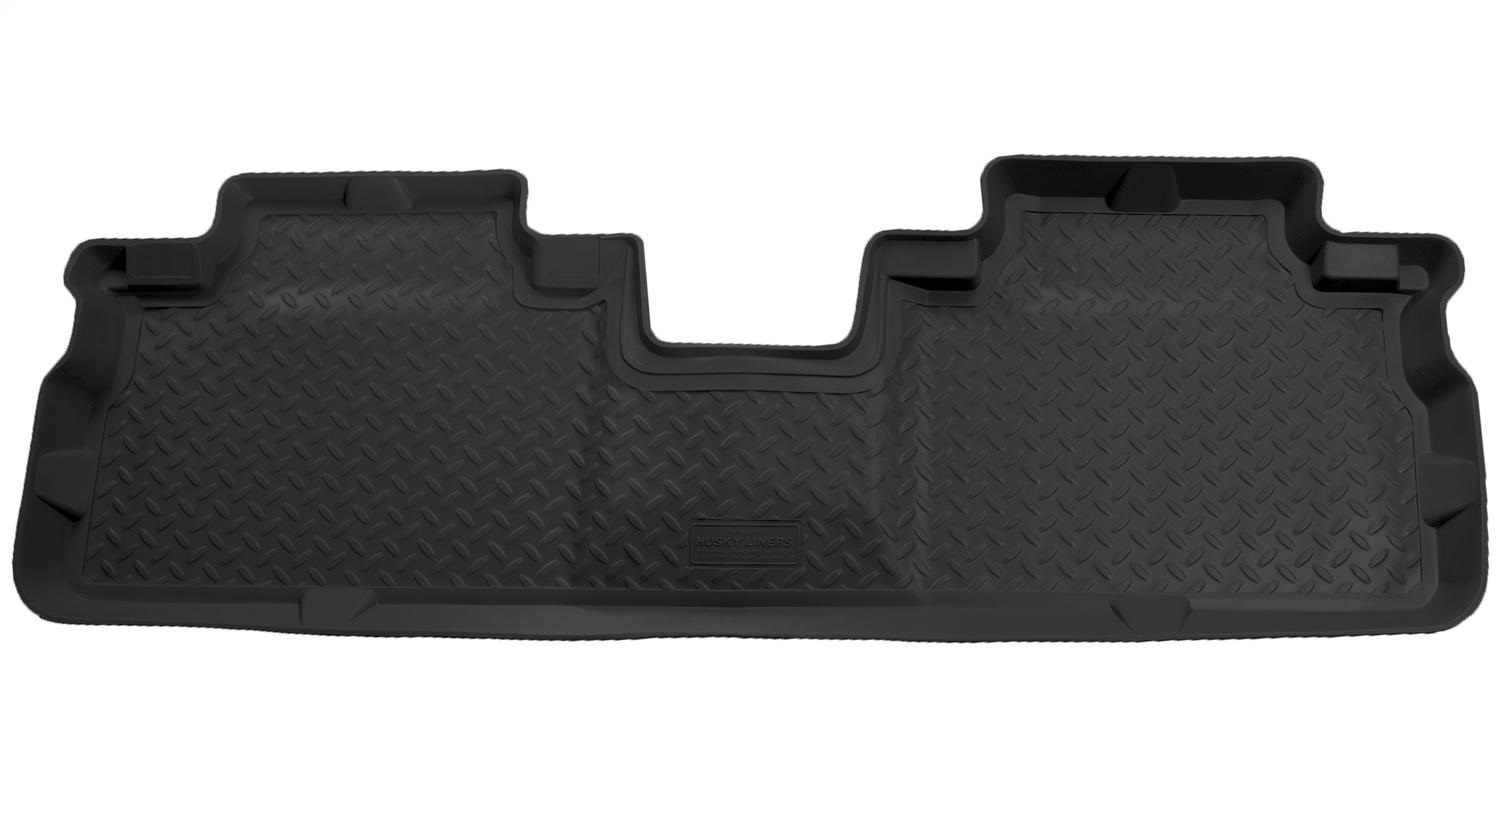 Husky Liners Husky Liners 63171 Classic Style; Floor Liner Fits 05-08 Escape Mariner Tribute